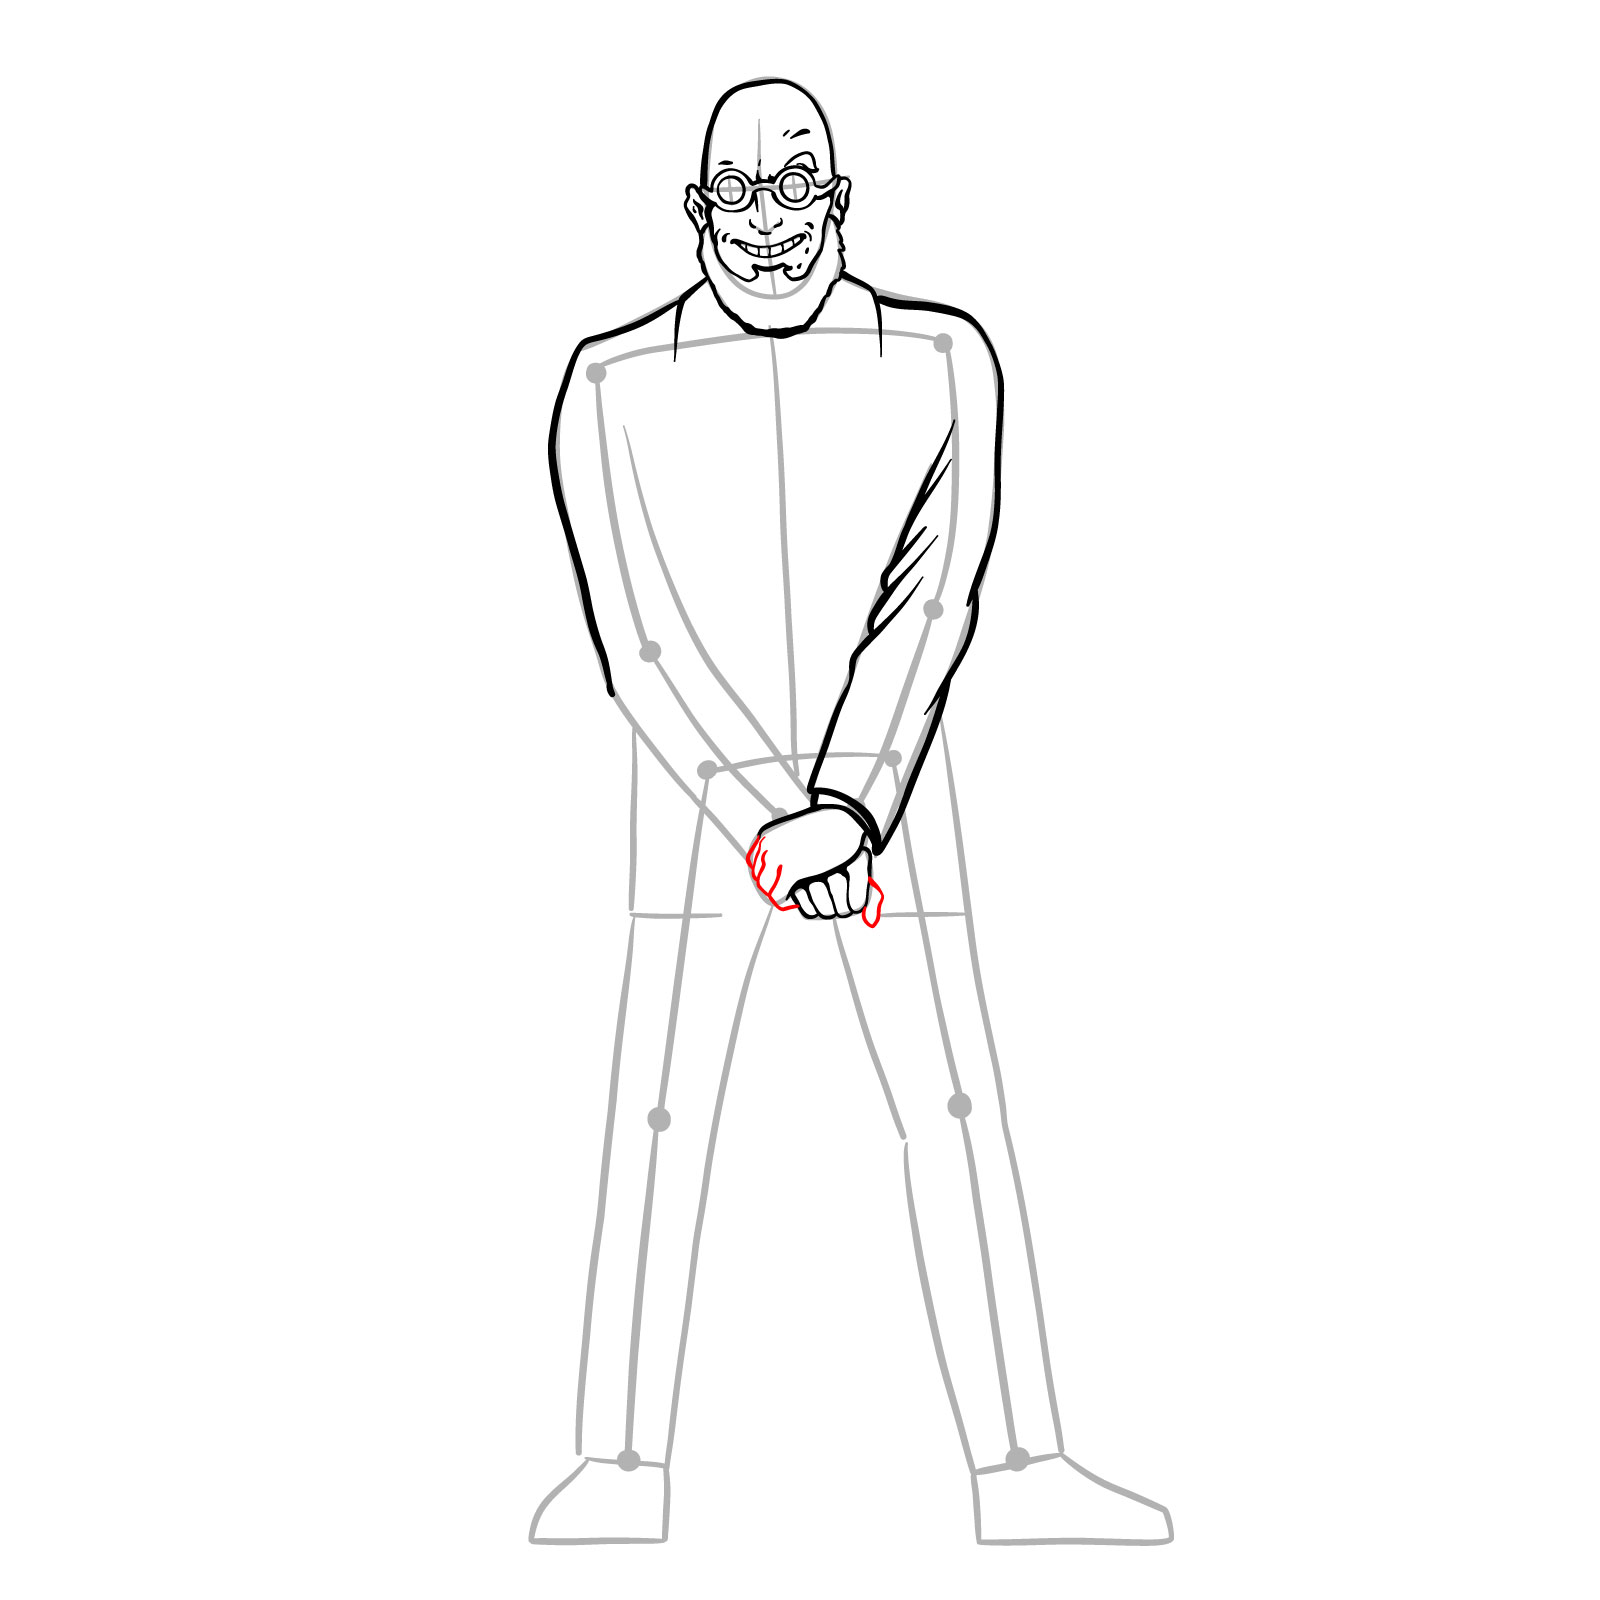 How to draw Dr. Hugo Strange from DC Comics - step 20